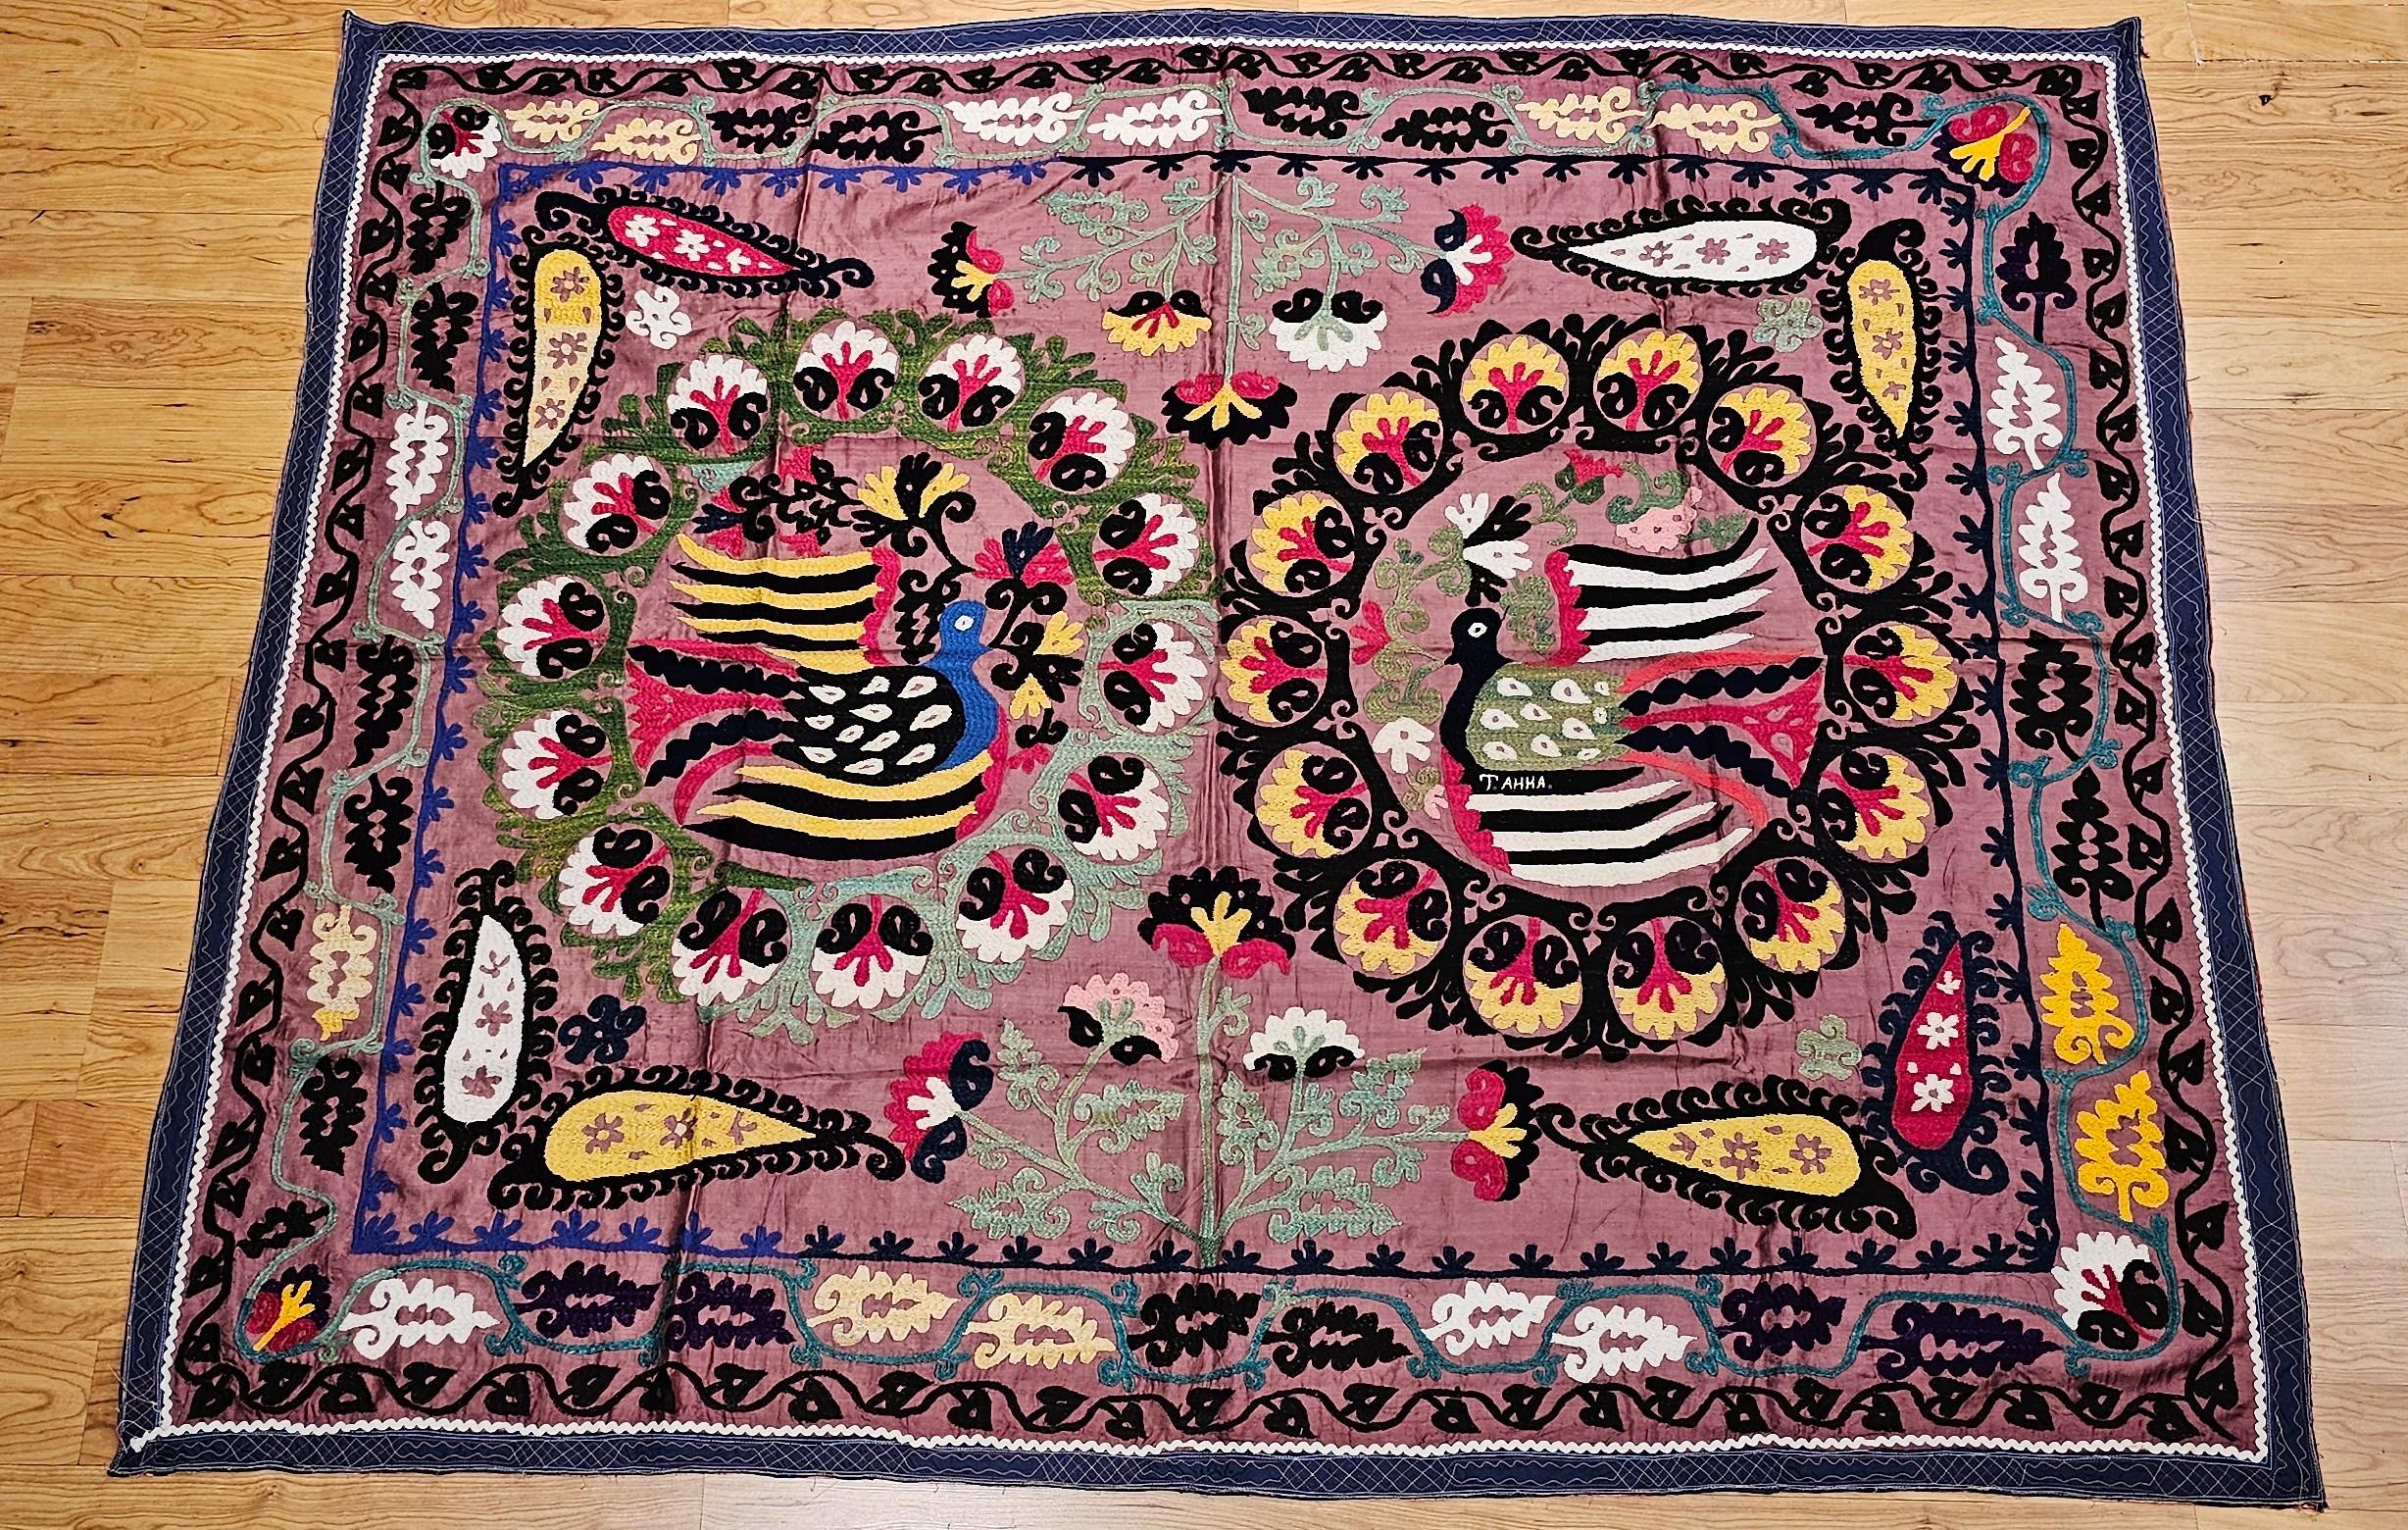 Vintage Silk Suzani Hand Embroidered Tapestry Featuring a Pair of Partridges from Uzbekistan in Central Asia. The design of this Suzani Embroidery is very unique and is unlike most Suzani embroideries that have medallion design. This Suzani